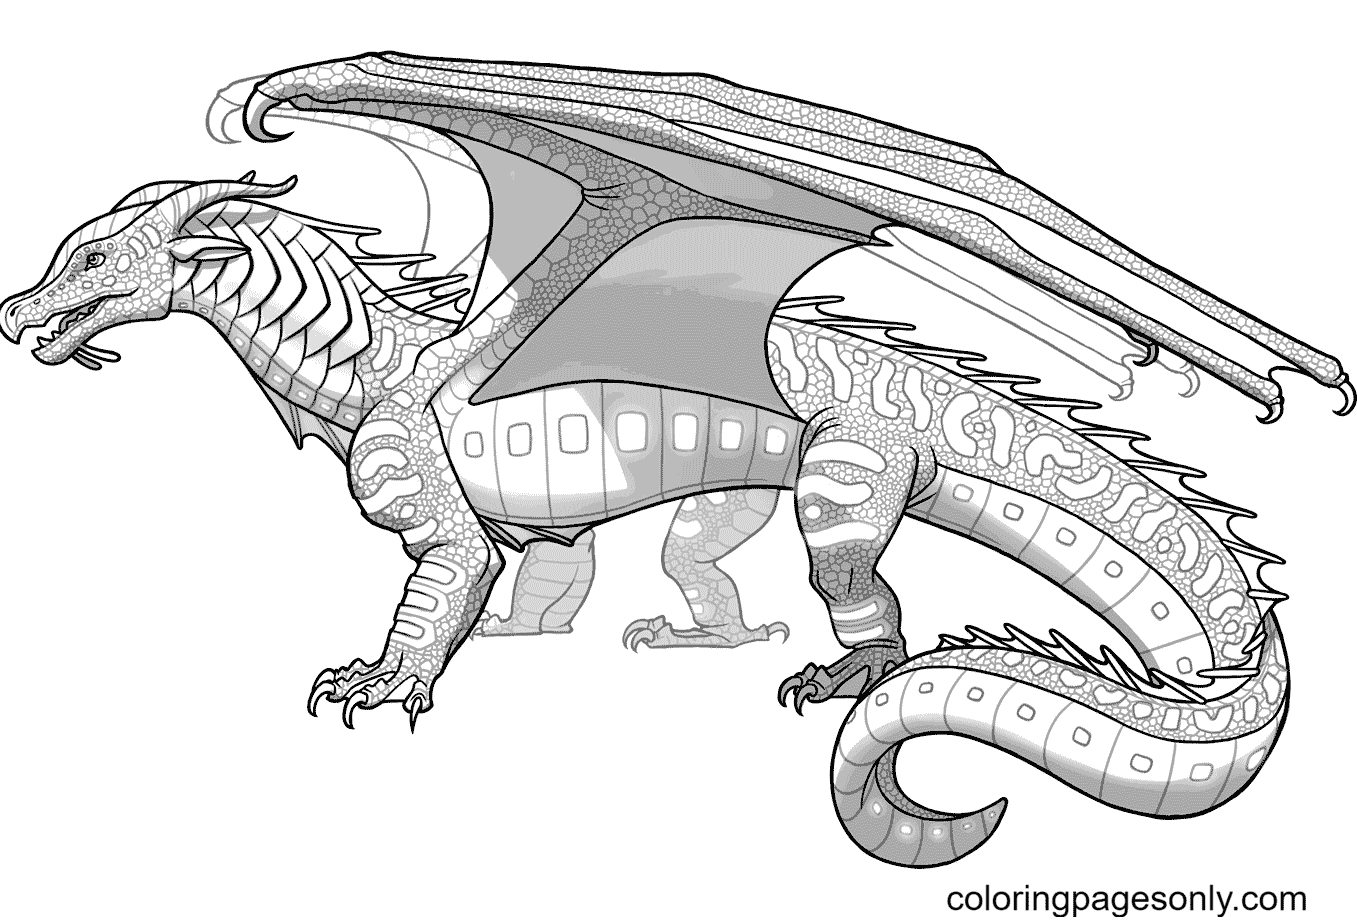 Seawings Dragon from Wings of Fire Coloring Pages